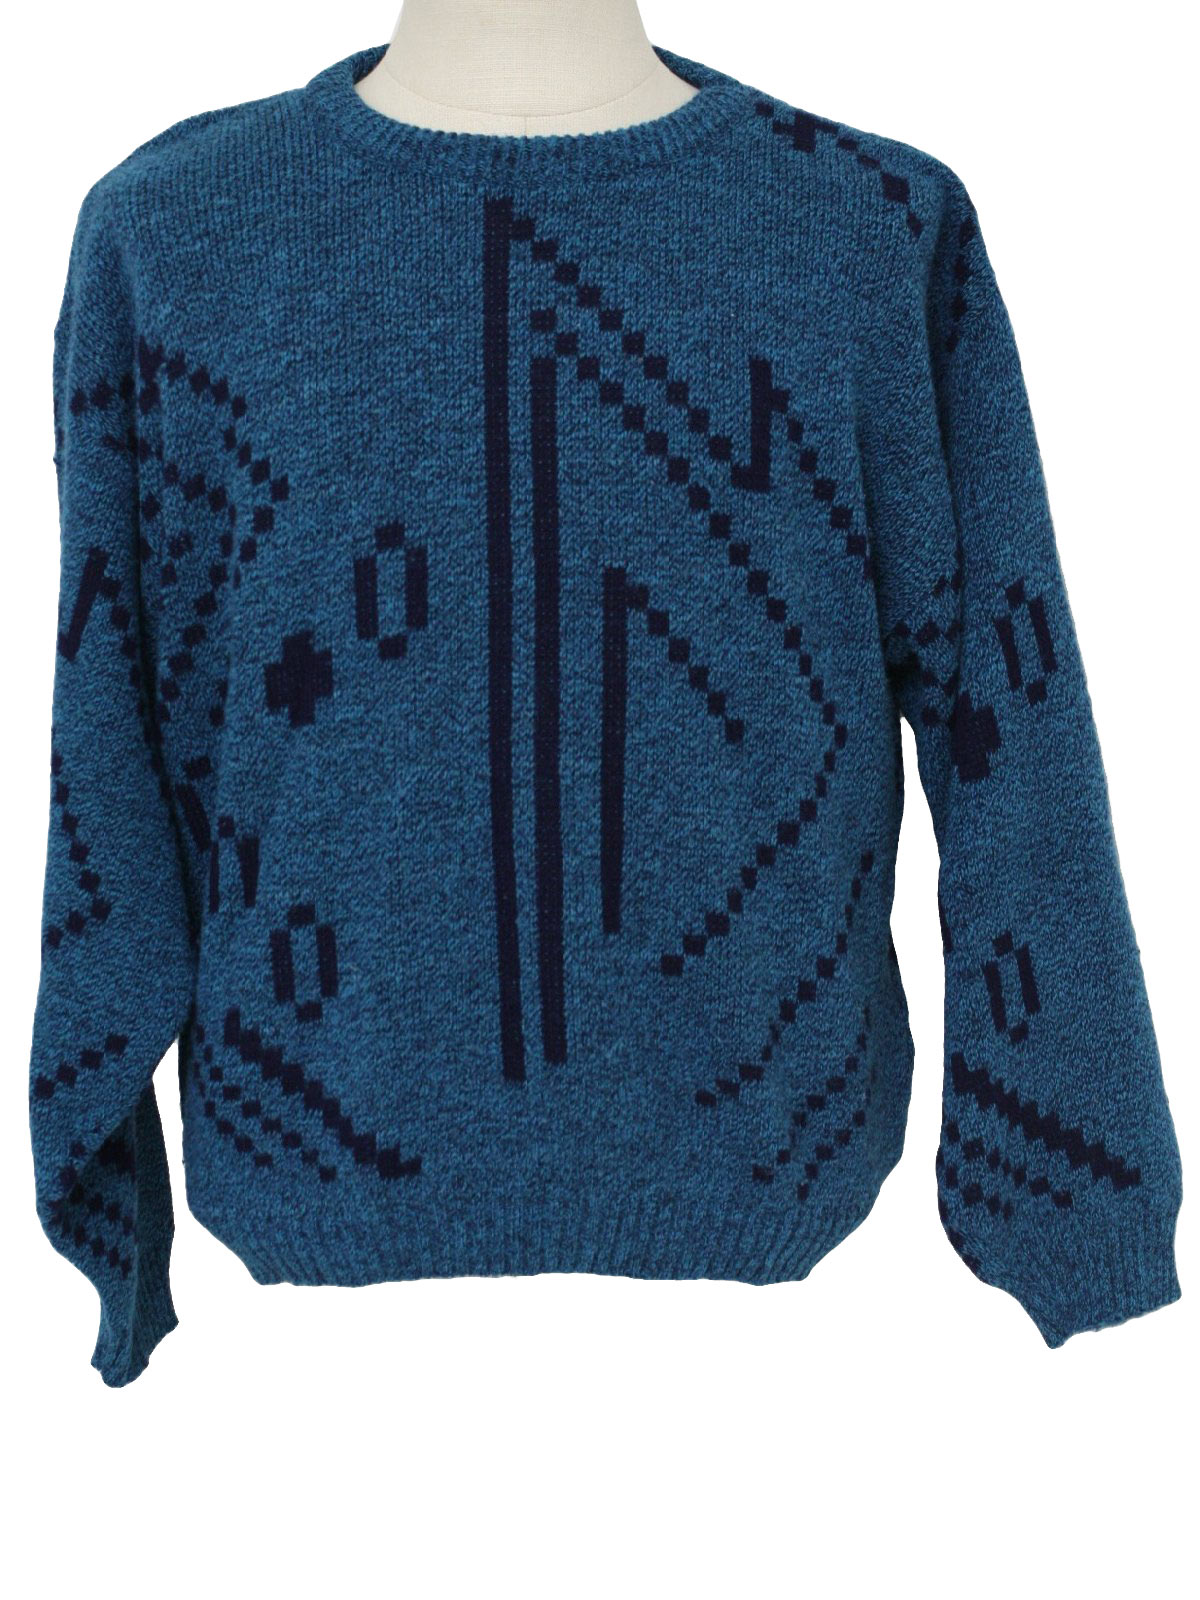 80s Sweater (Le Tigre): 80s -Le Tigre- Mens turquoise and navy acrylic ...